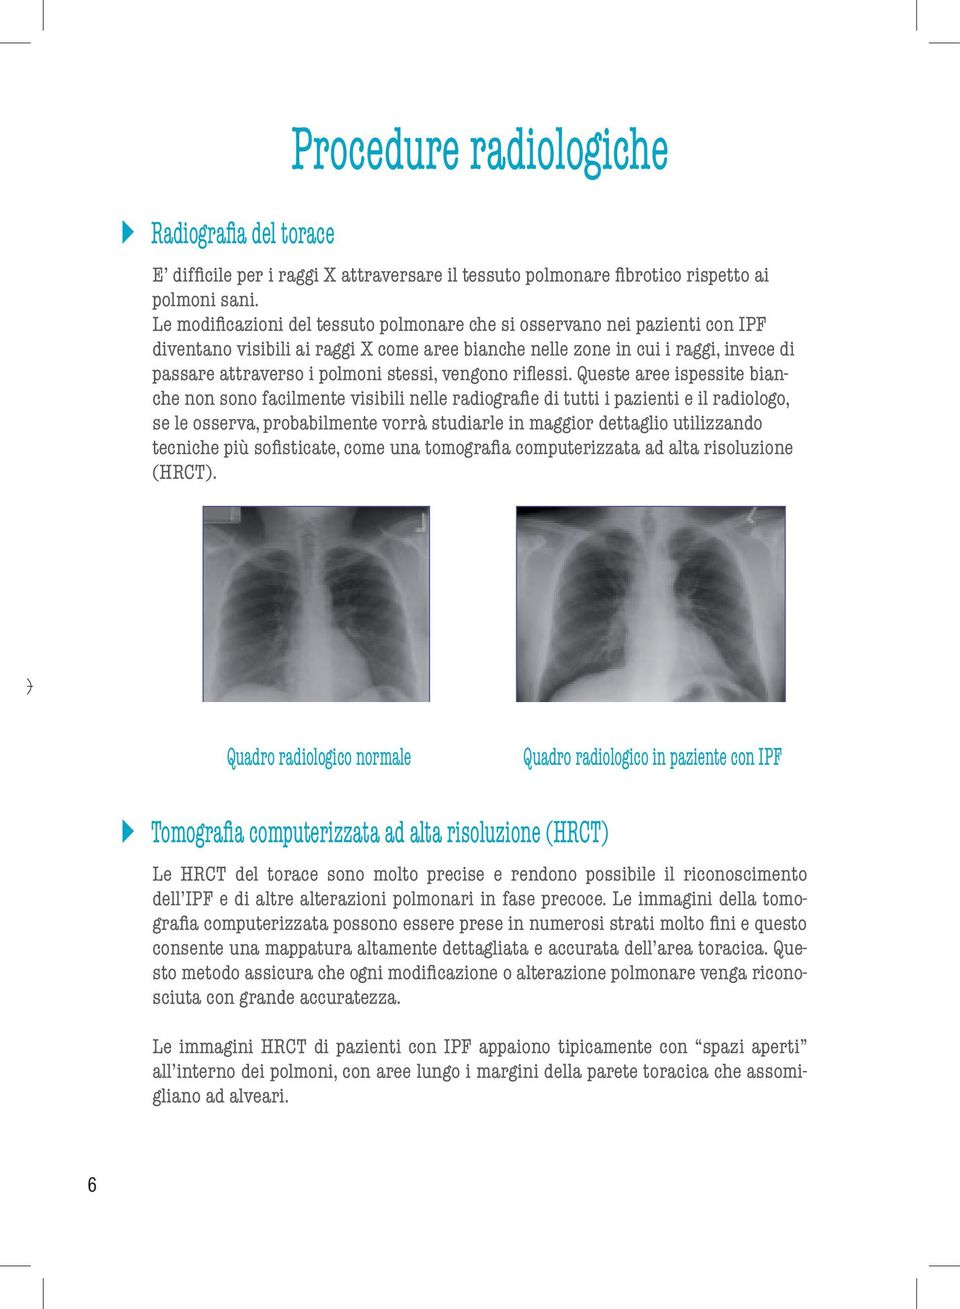 The Le modificazioni changes in lung del tissue tessuto that are polmonare seen in IPF patients che si osservano become visible nei on pazienti X-ray images con IPF as white areas diventano in the